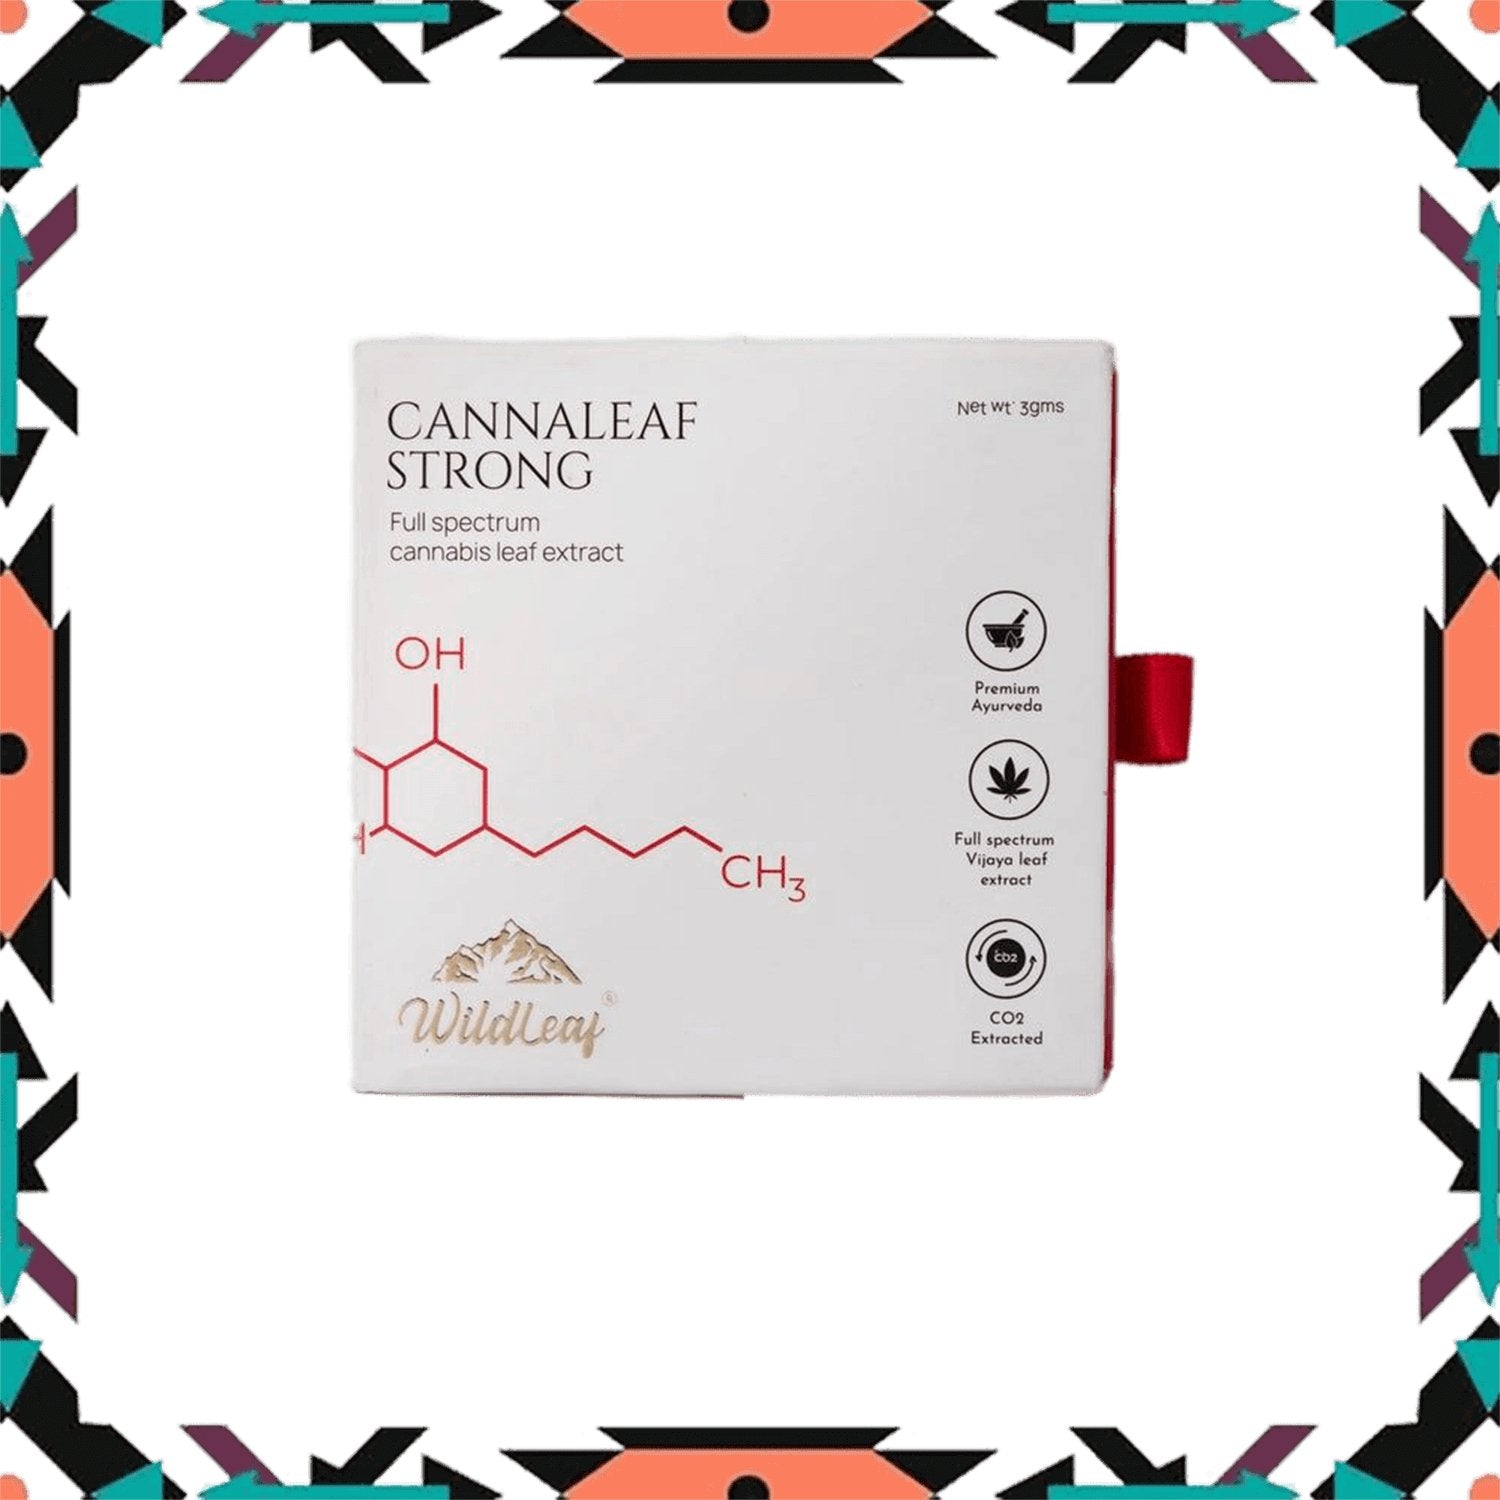 Cannaleaf Strong by Wildleaf - Full Spectrum Cannabis Leaf Extract - CBD Store India